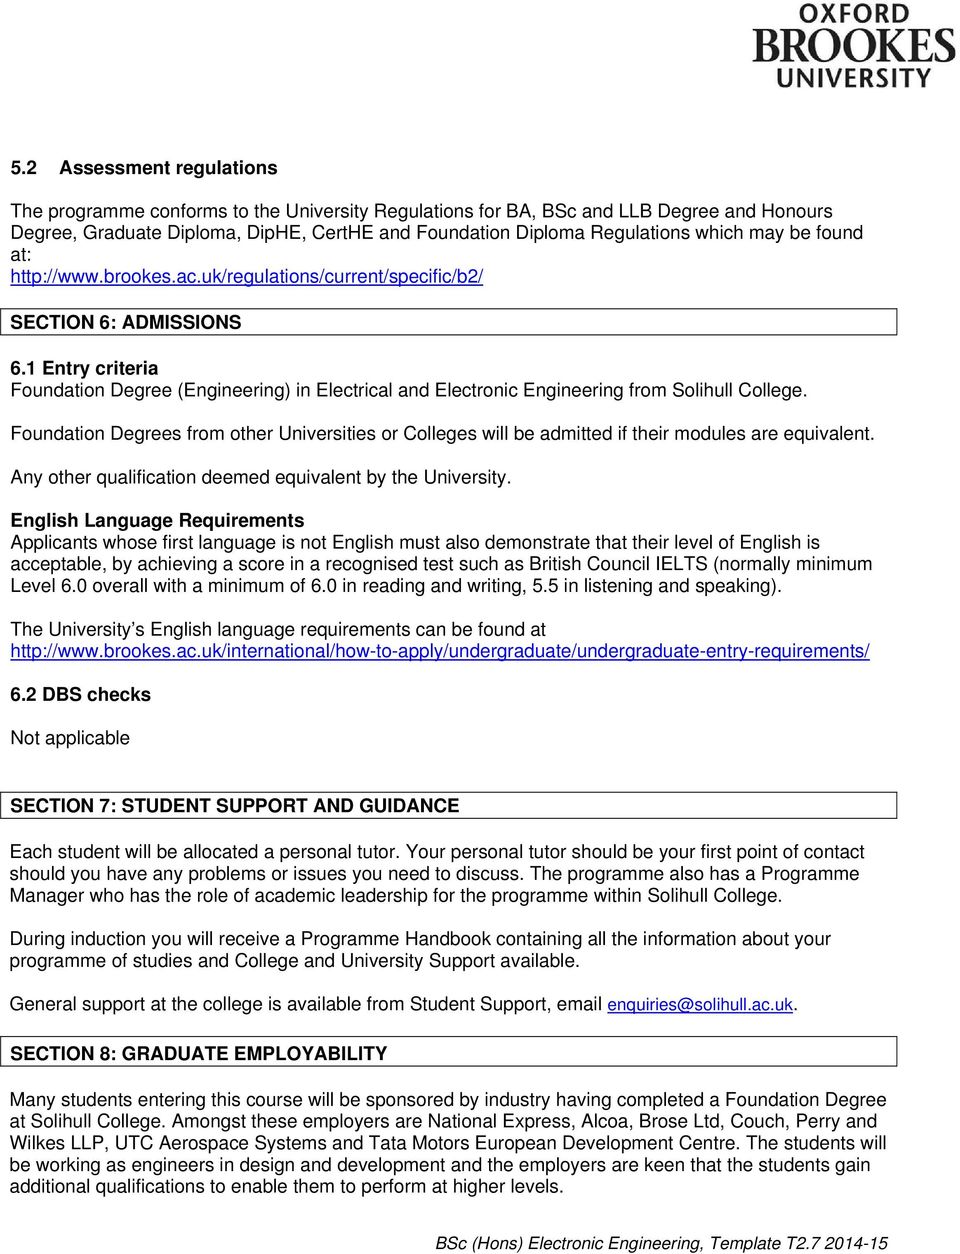 1 Entry criteria Foundation Degree (Engineering) in Electrical and Electronic Engineering from Solihull College.